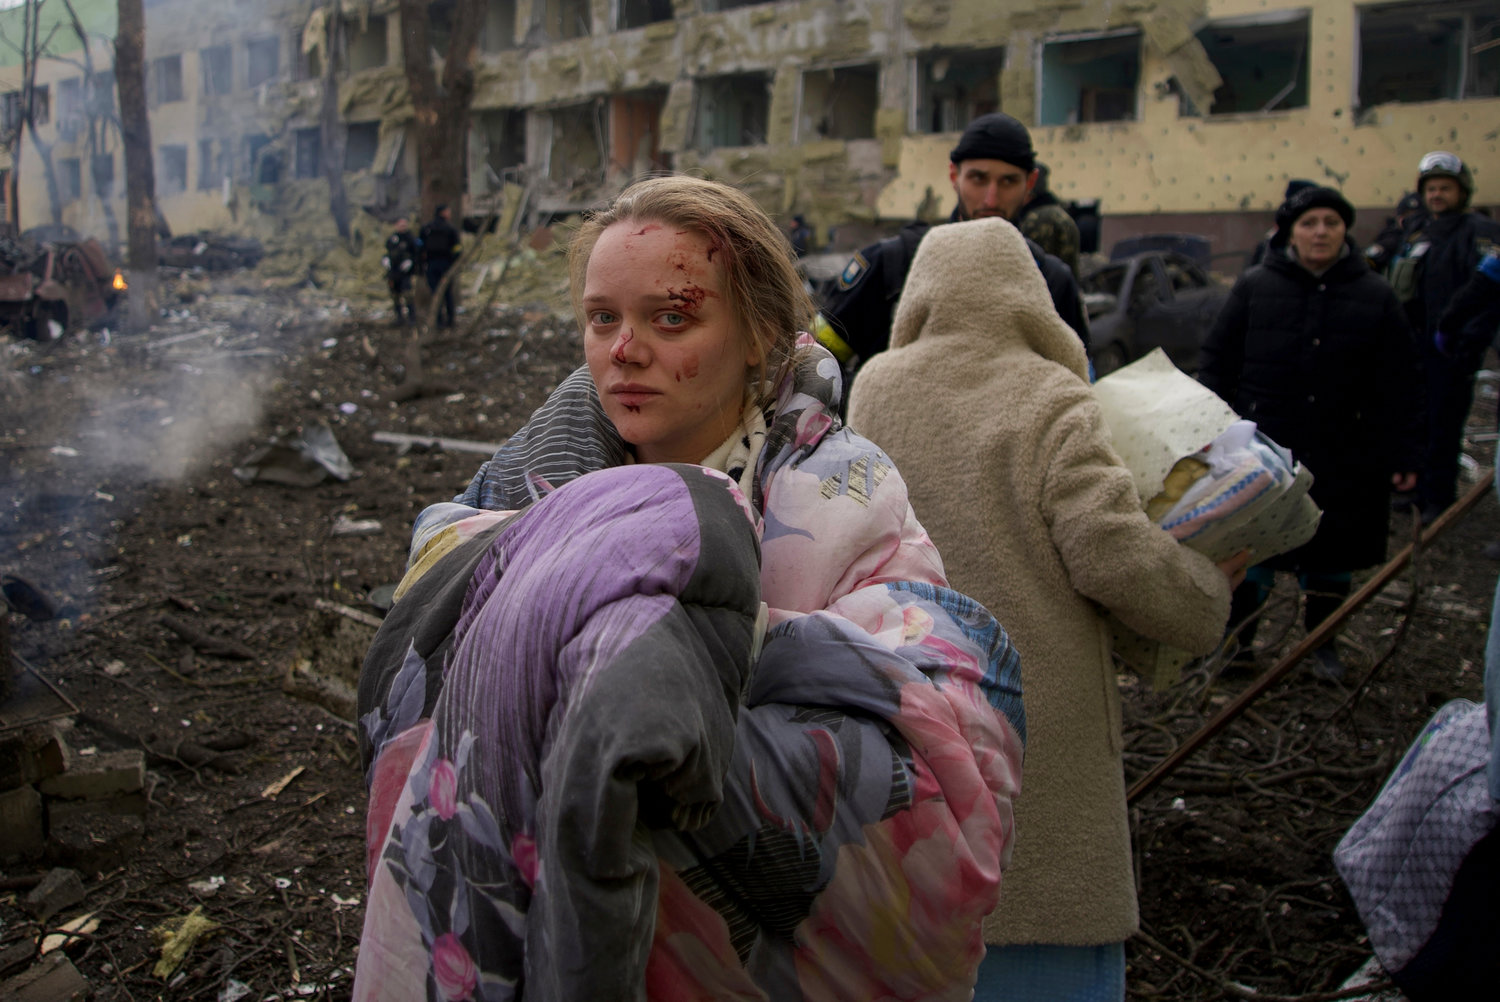 Mariana Vishegirskaya stands outside a maternity hospital that was damaged by shelling in Mariupol, Ukraine, Wednesday, March 9, 2022. Vishegirskaya survived the shelling and later gave birth to a girl in another hospital in Mariupol. (AP Photo / Mstyslav Chernov)